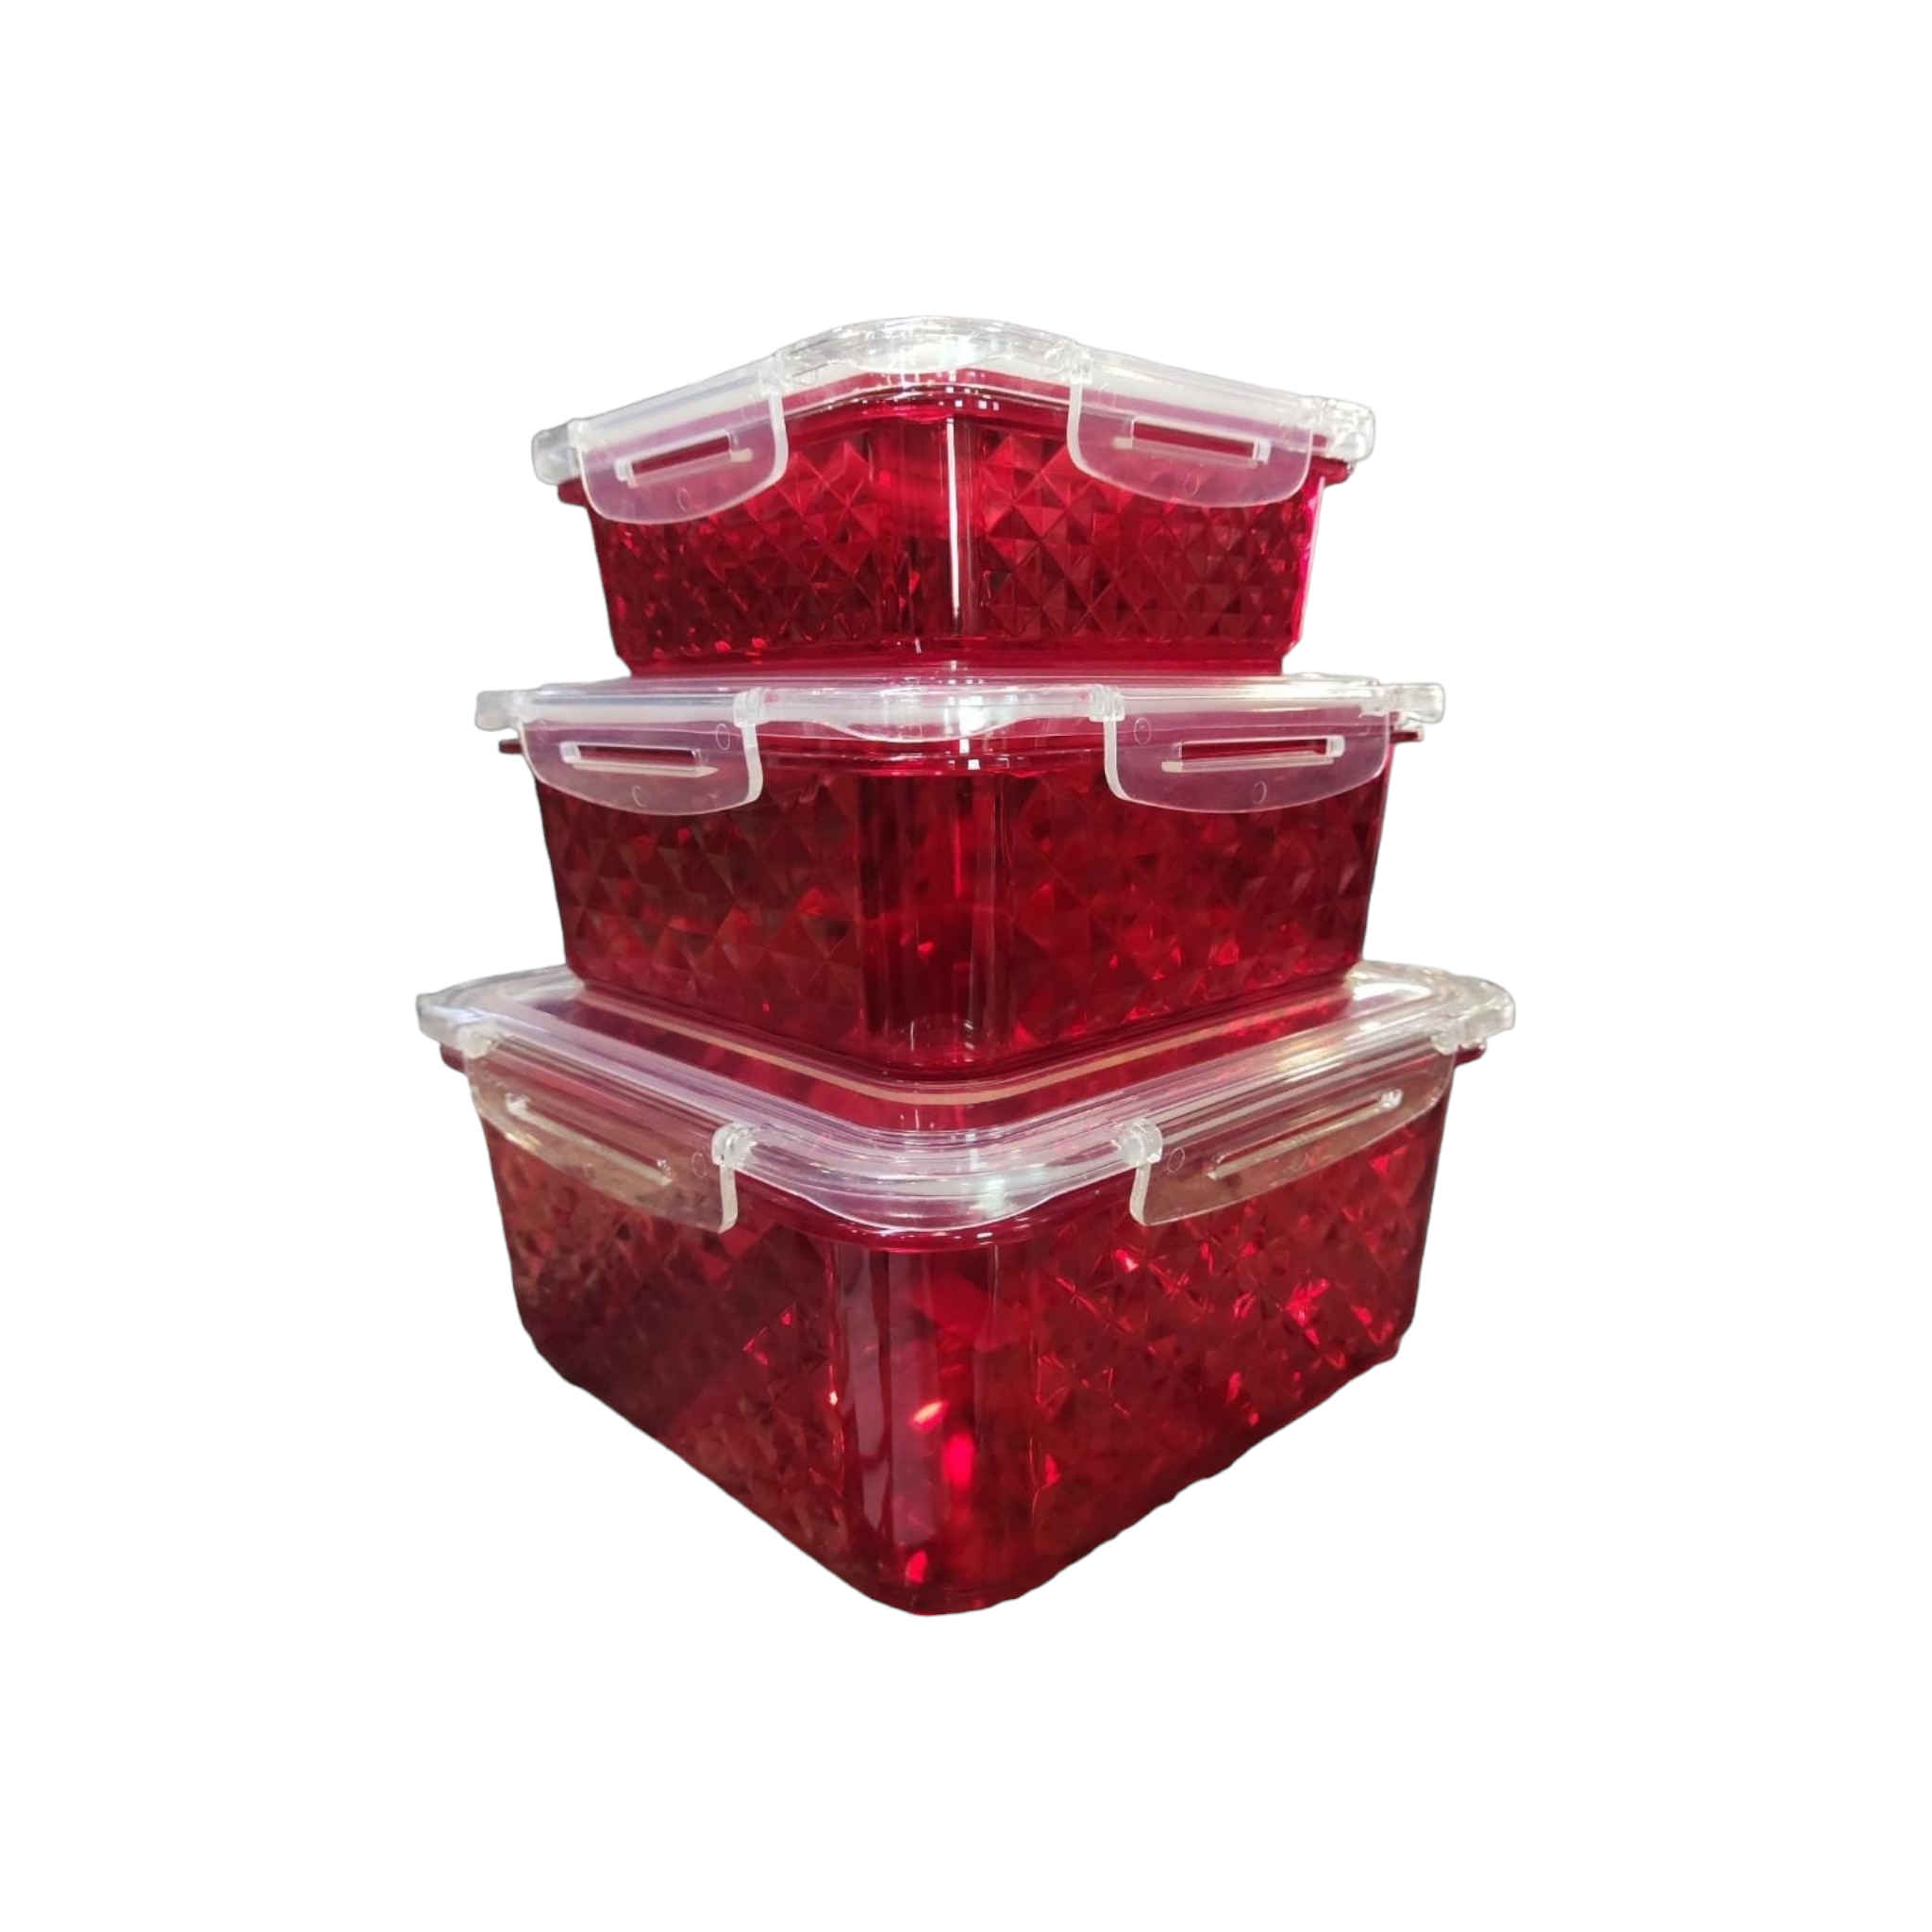 Continental Homeware Acrylic Storage Box 3Pcs Set with Tight Lock Lid Crystal Design Container Set CH469